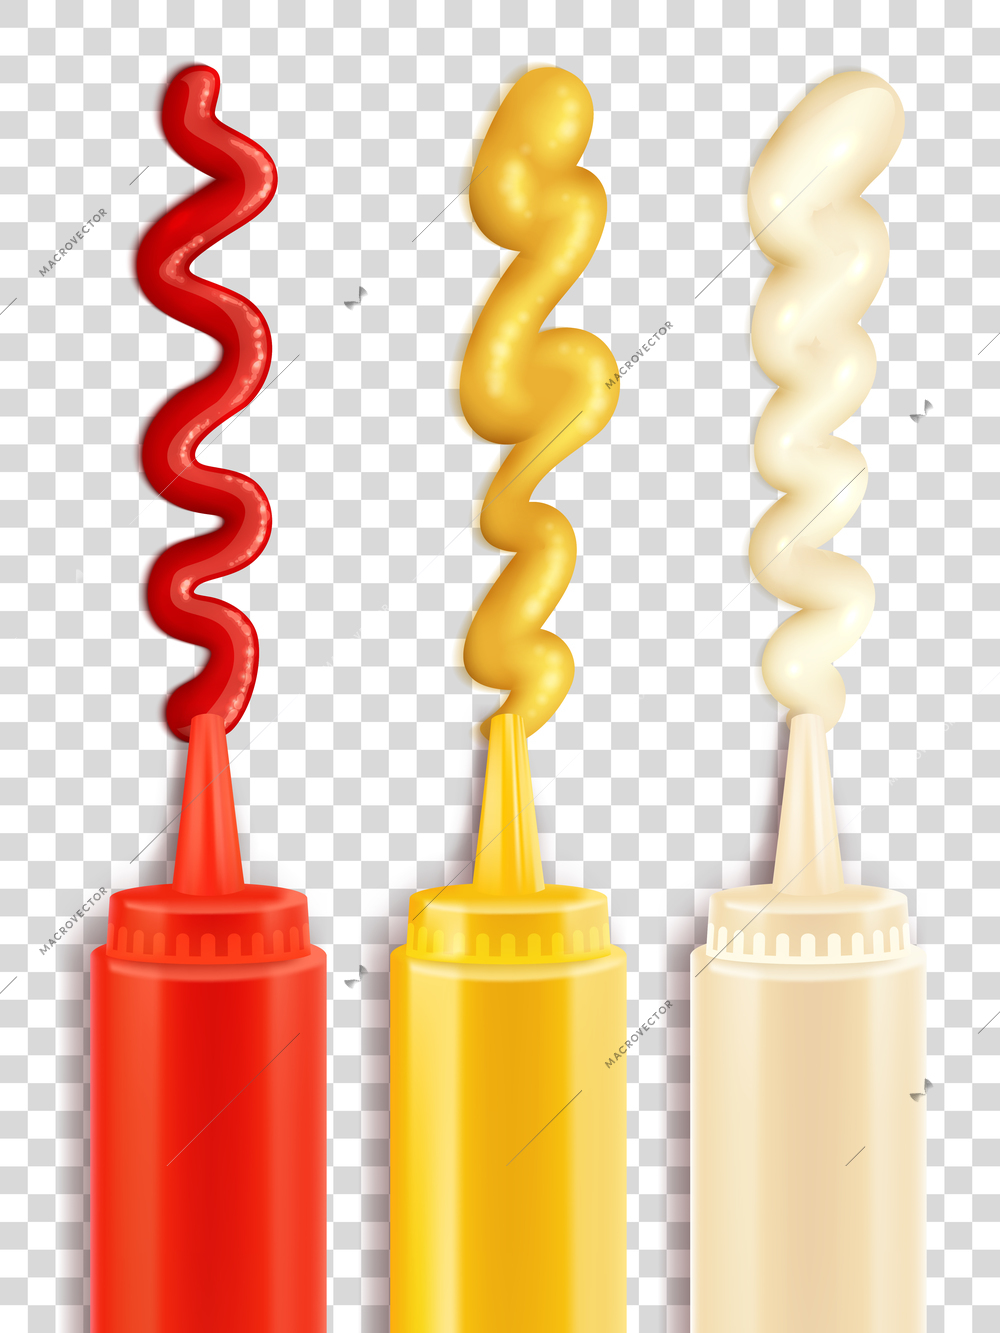 Color icons depicting sauce bottle with strips of seasoning vector iluustration